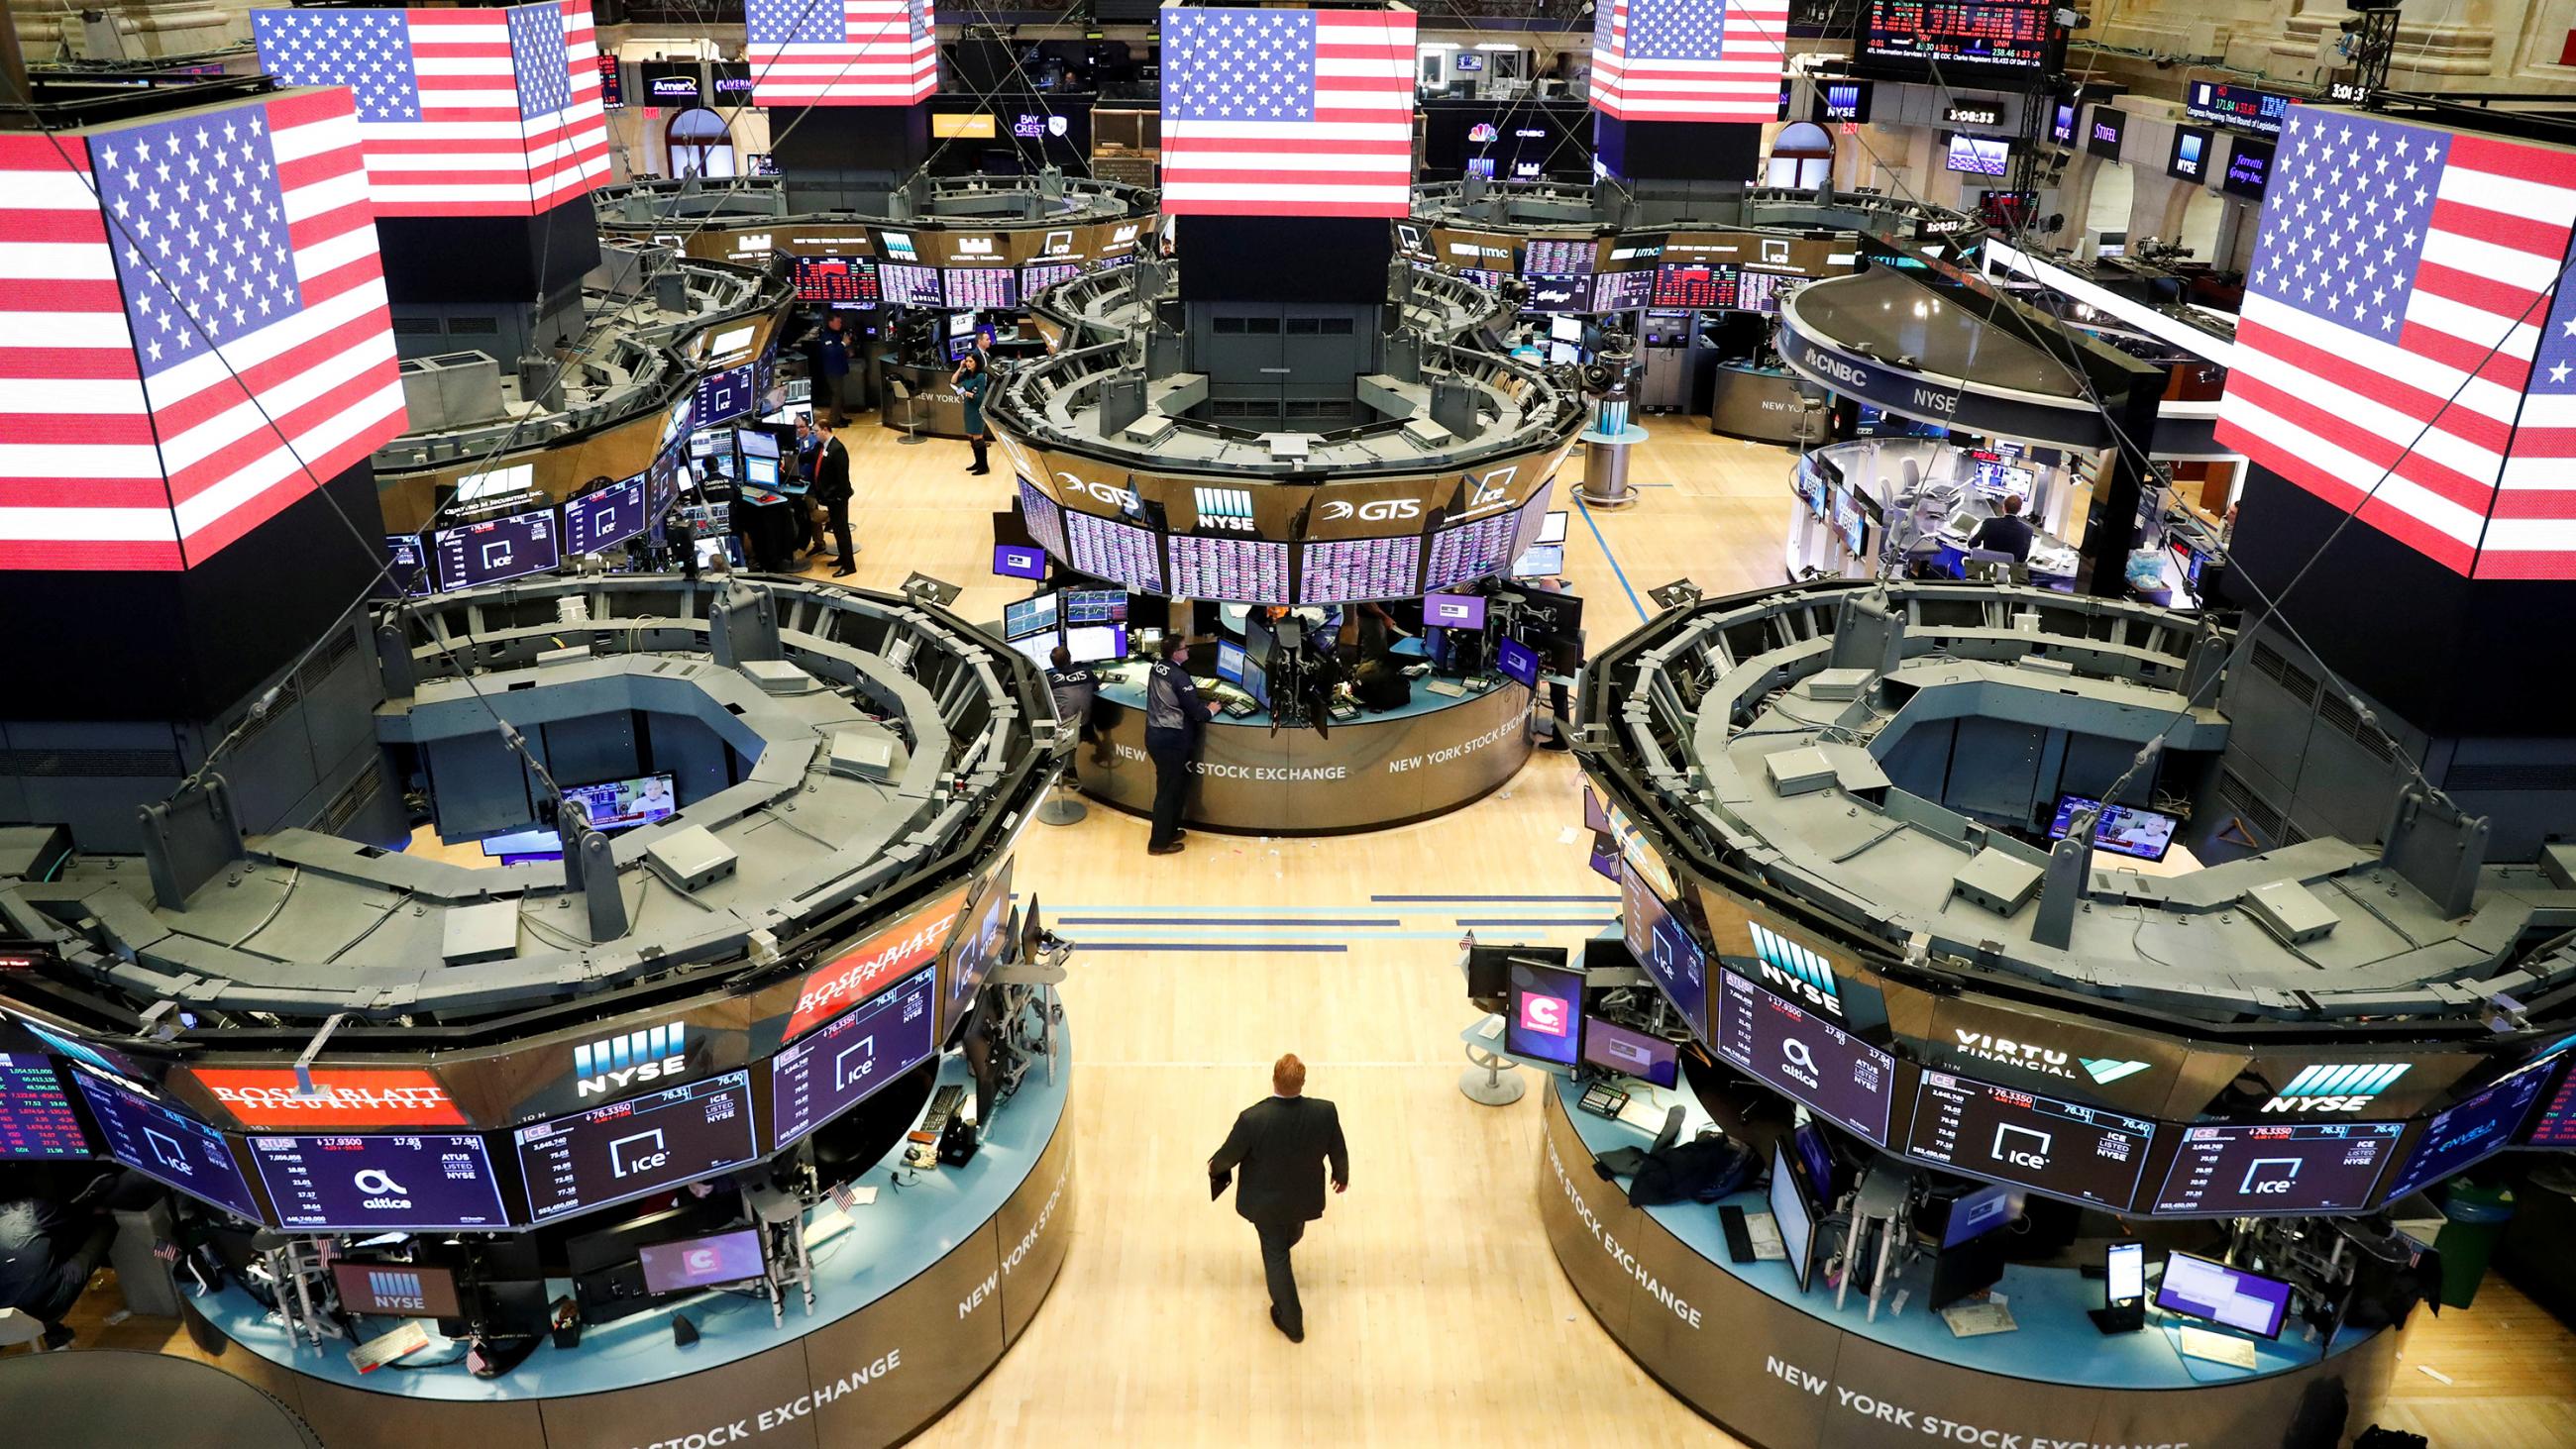 The photo shows the floor of the stock exchange emptied of most people. 